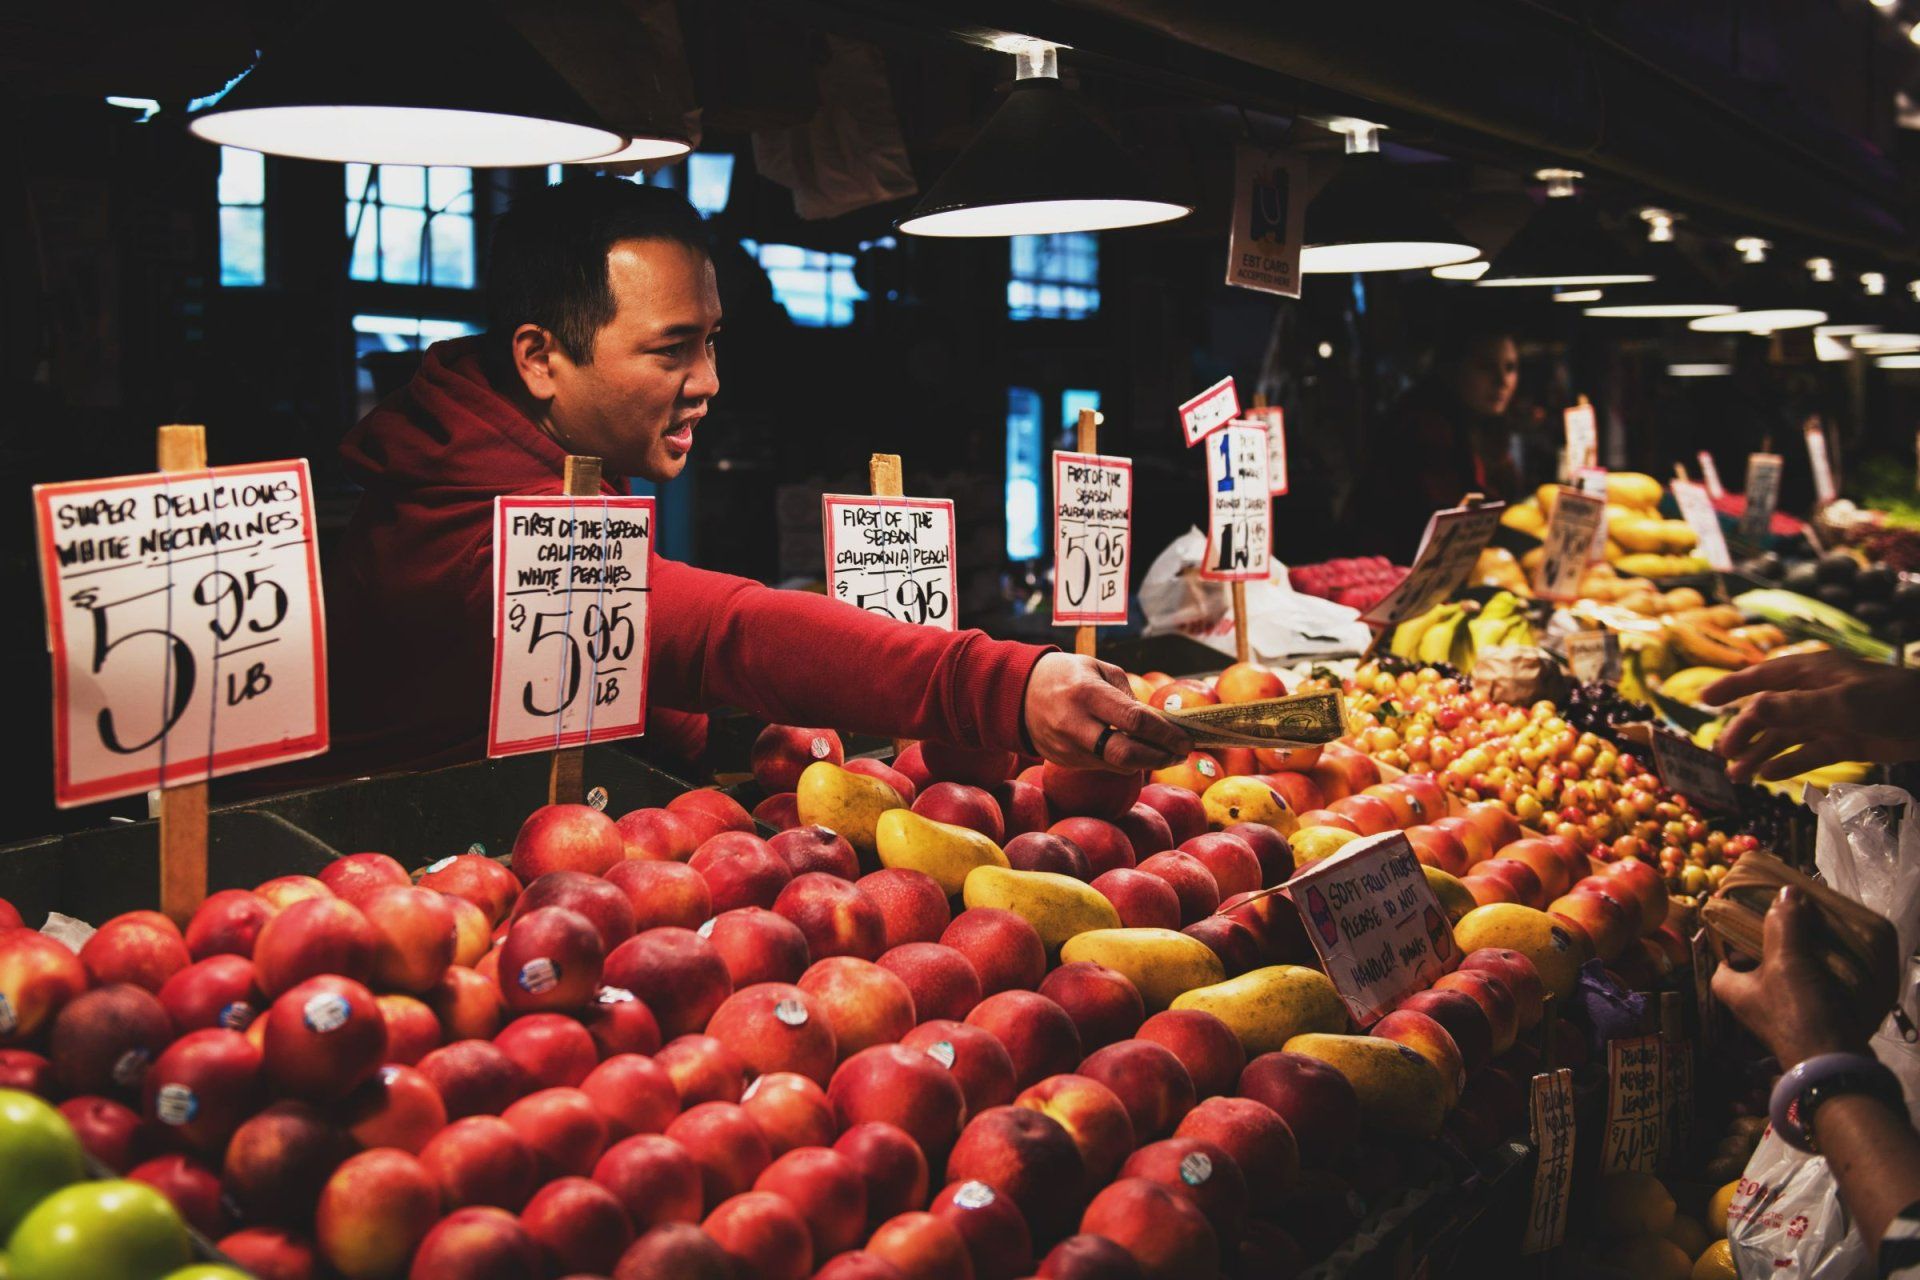 a man stands in front of a fruit stand that sells apples for 95 cents